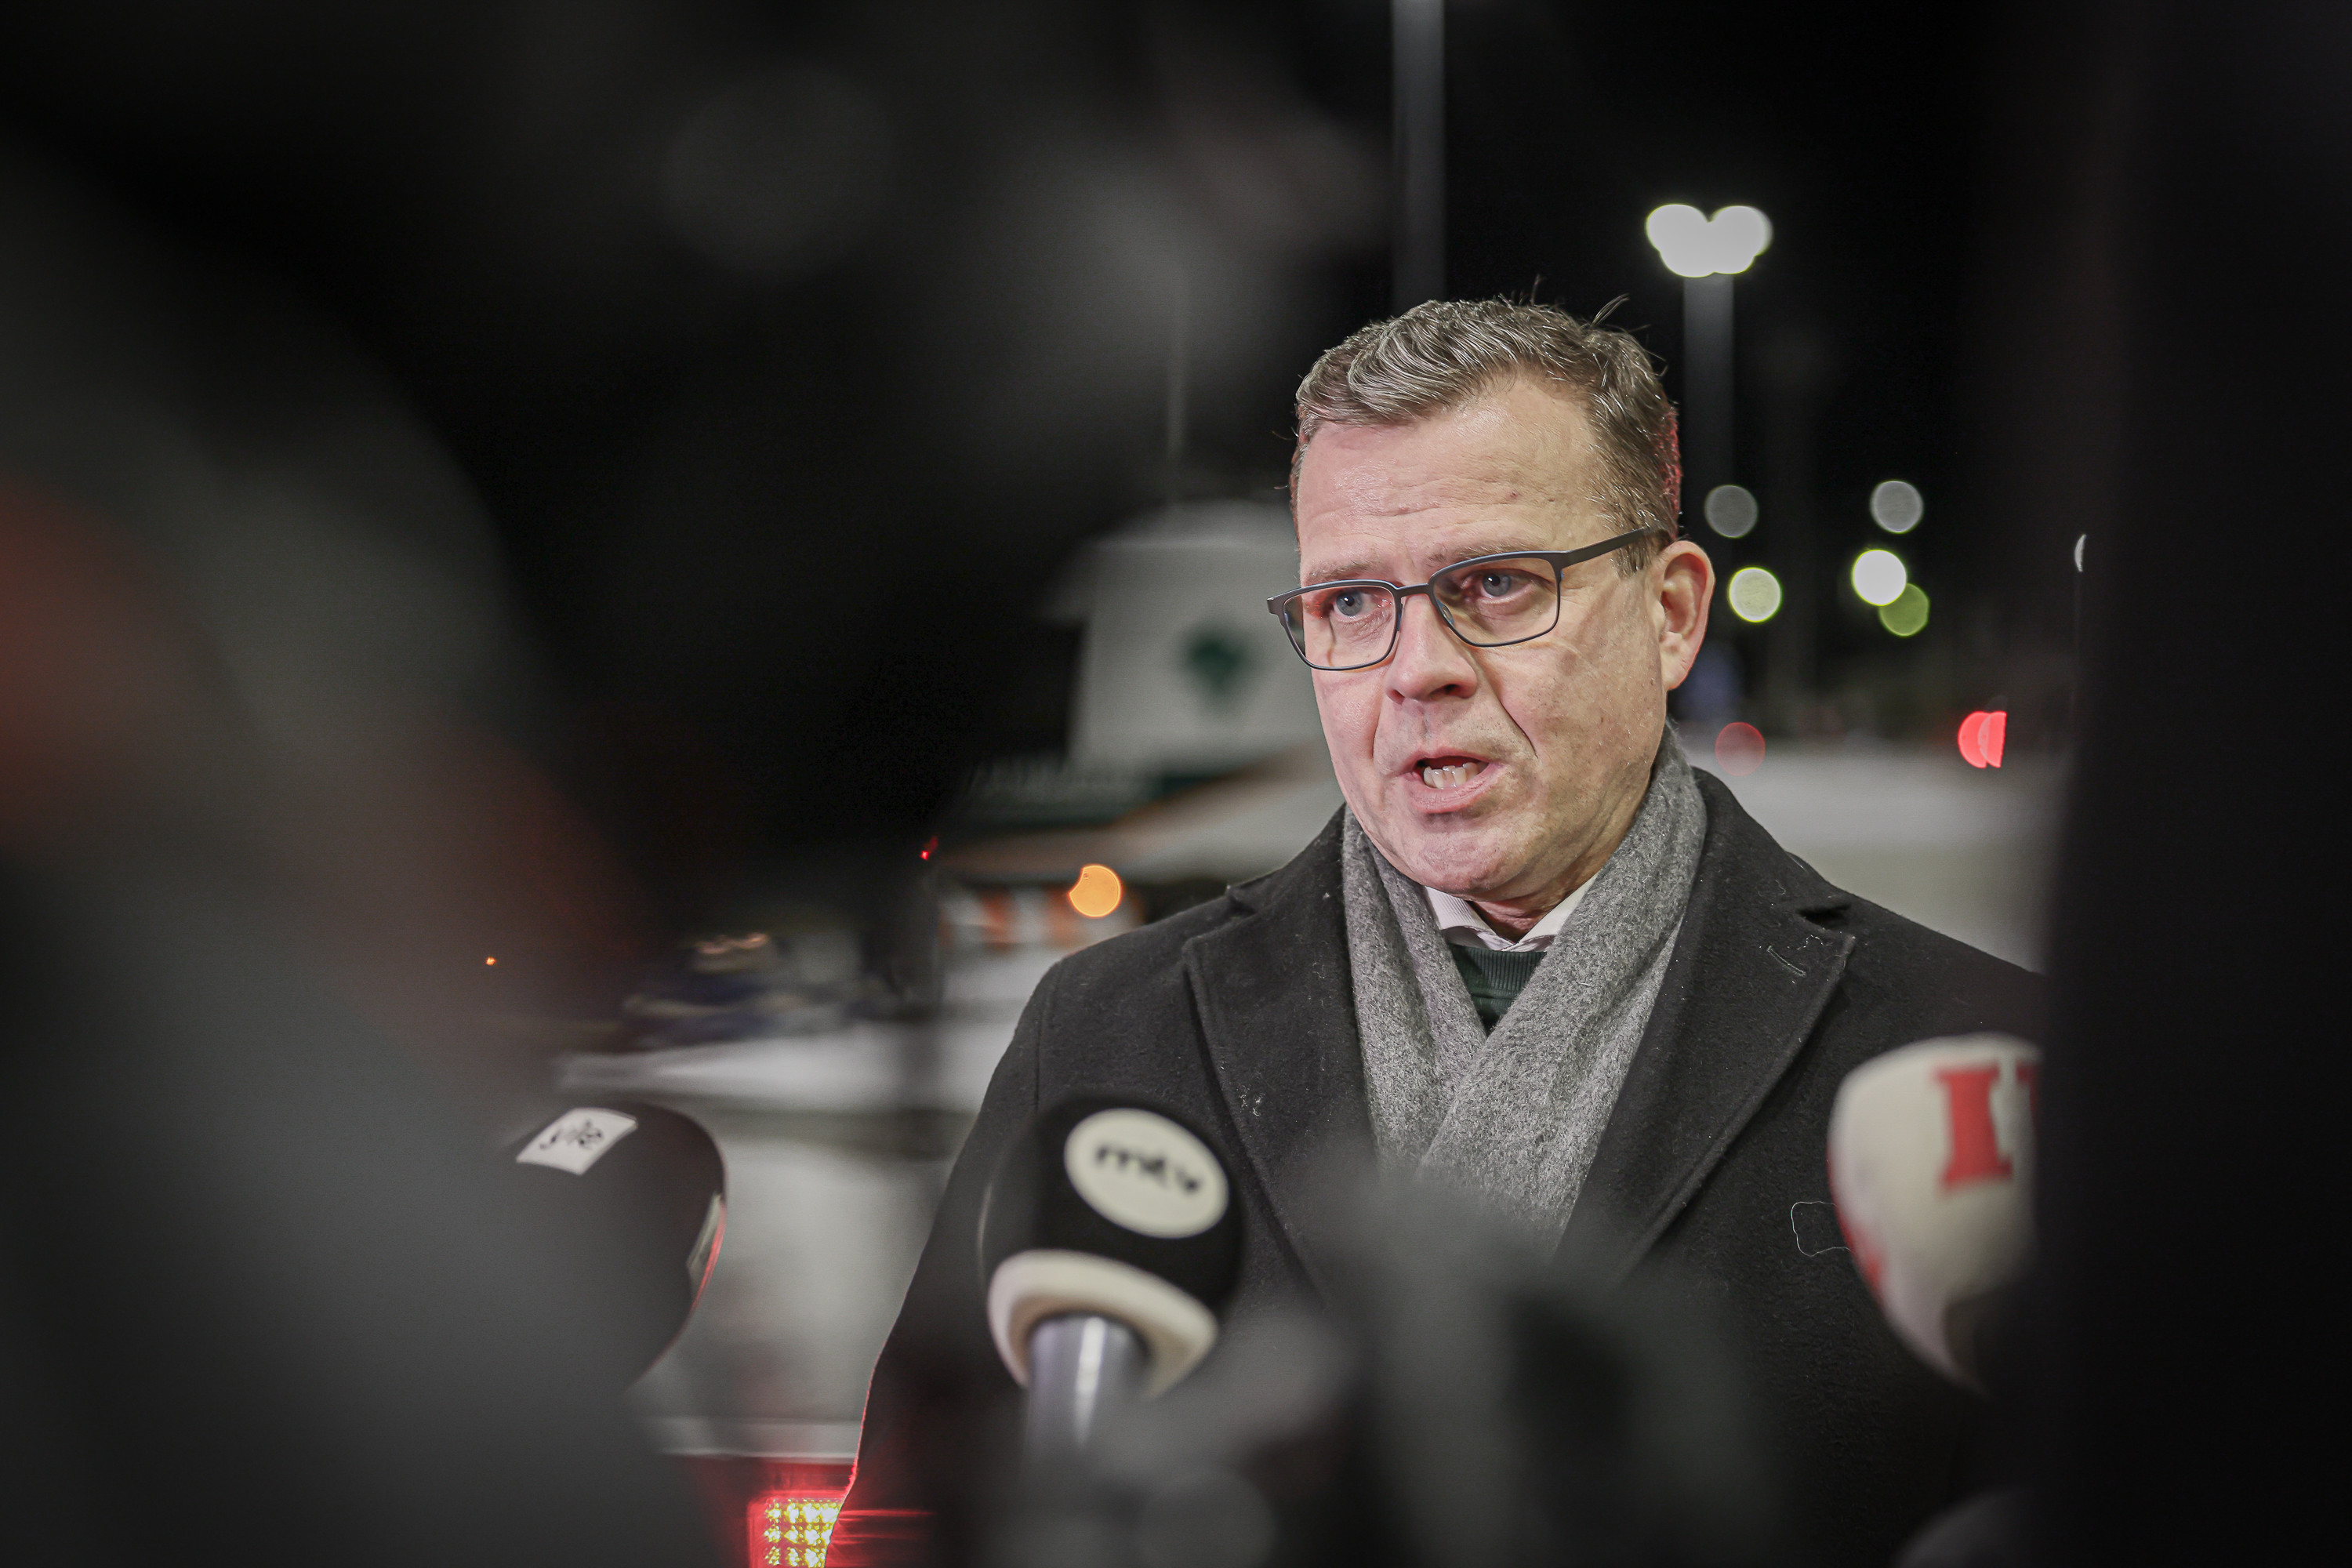 Prime Minister Orpo: Finland will decide whether to end or extend the closure of the eastern borders next week